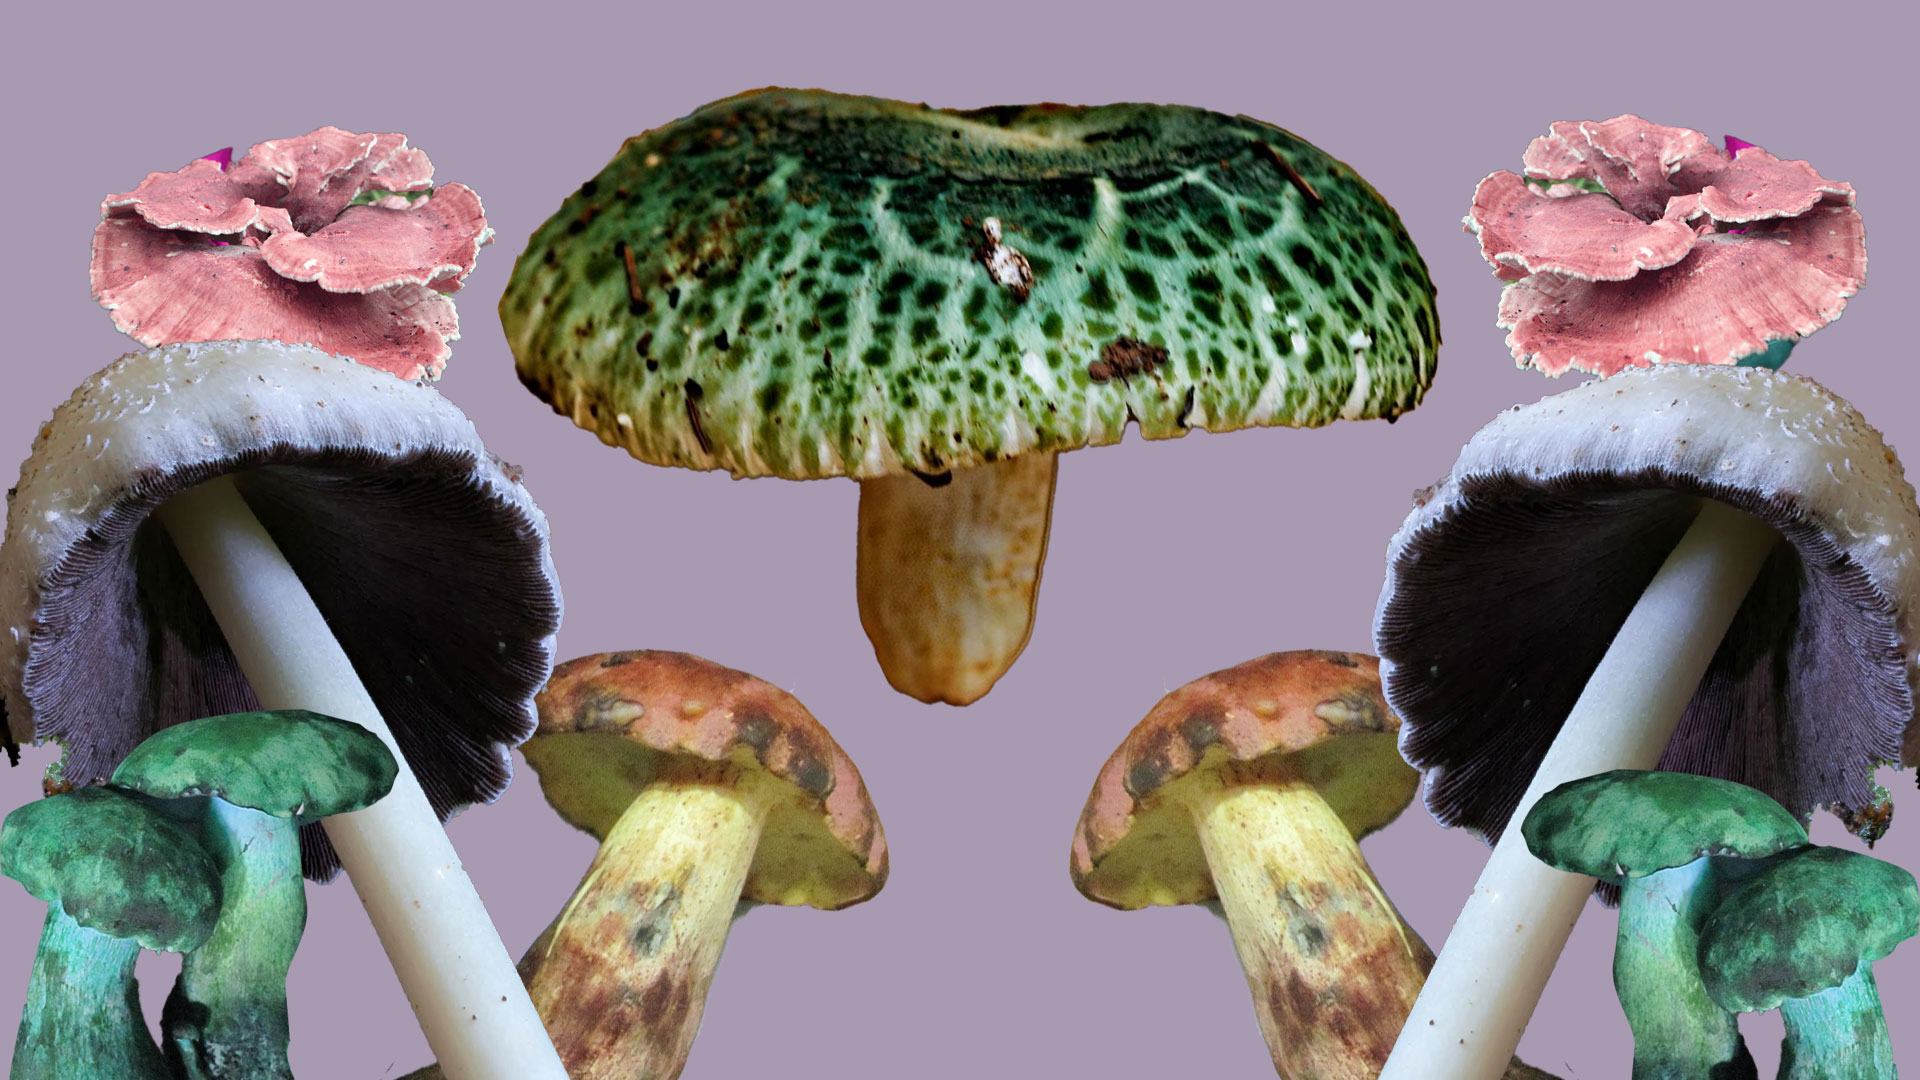 Get High, Hard or Satisfied From These Chinese Mushrooms